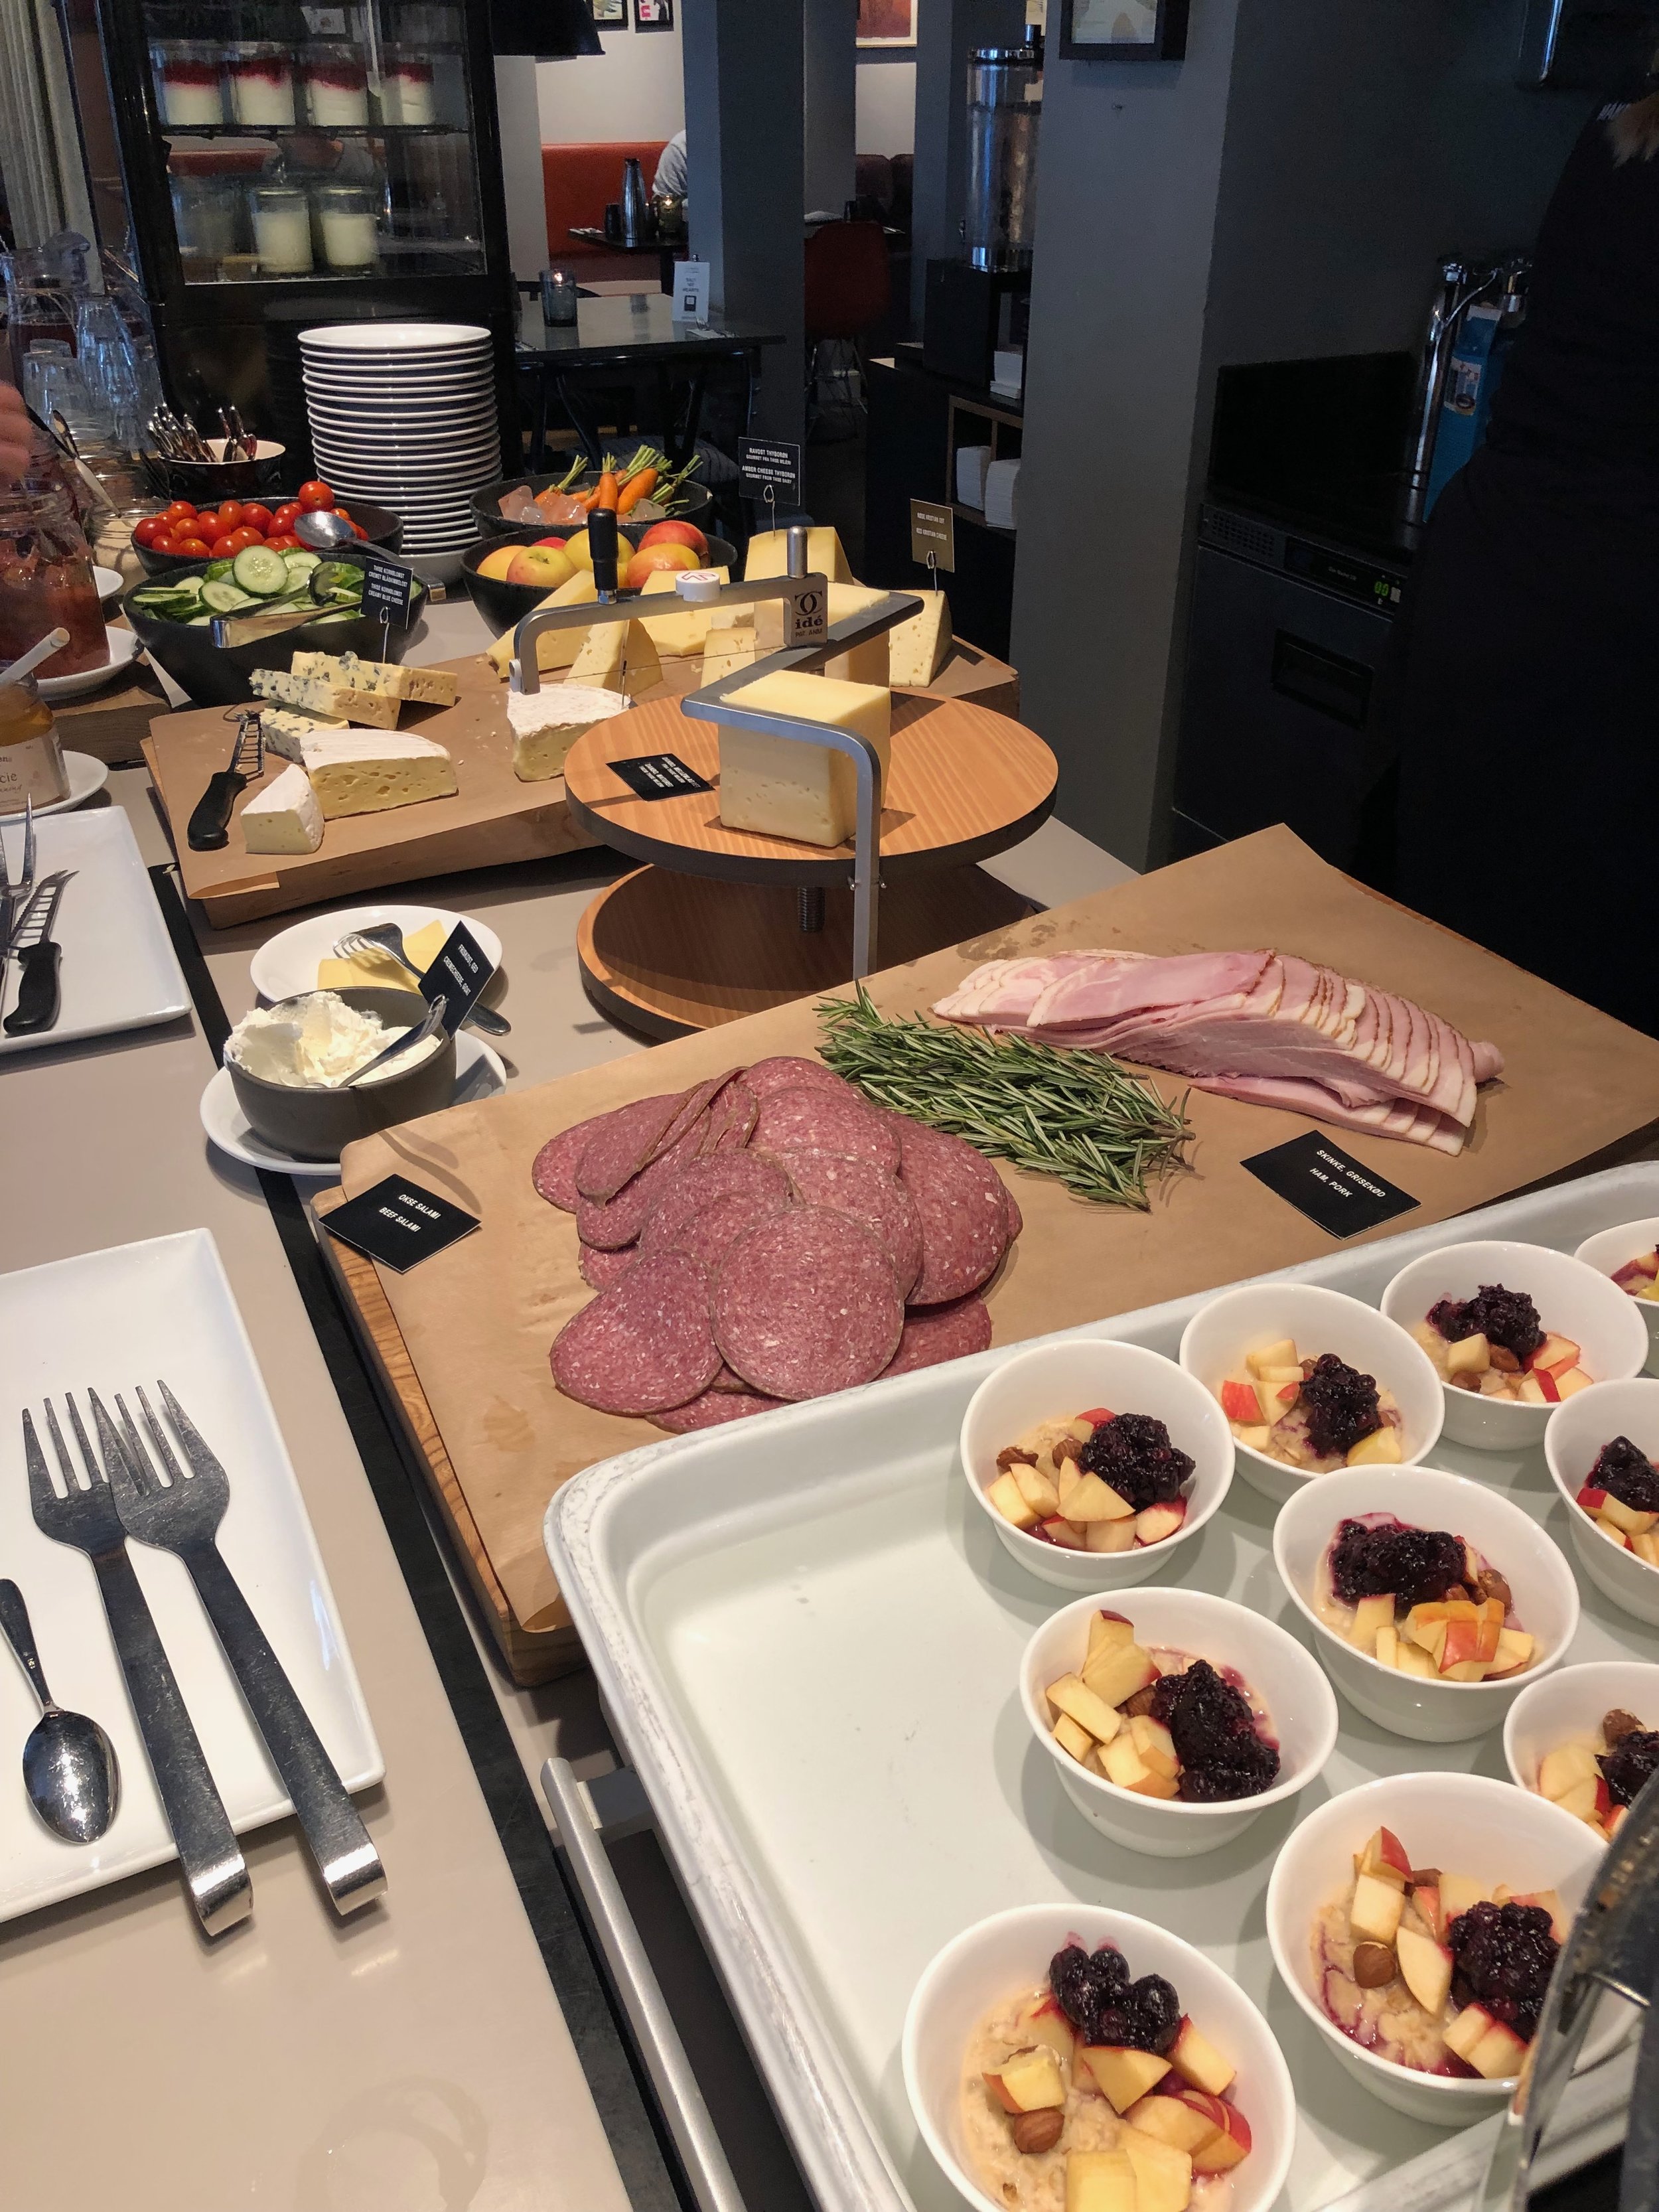 Grød with fruit, meats, cheeses, veggies